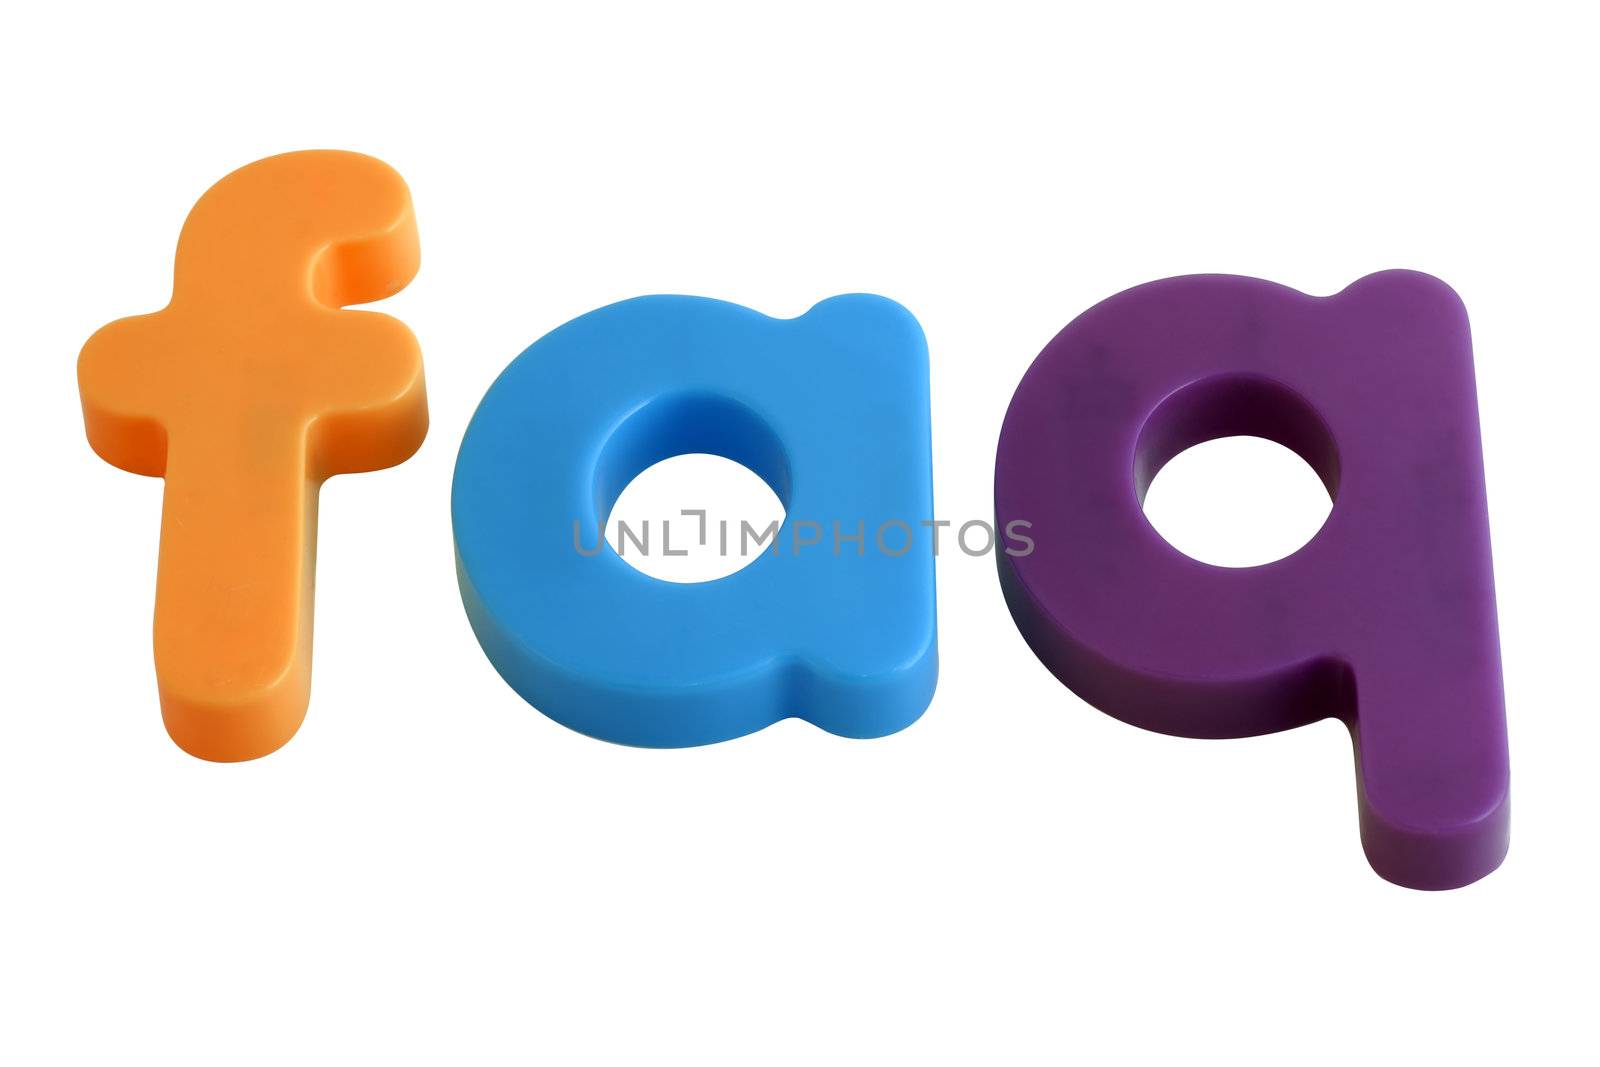 FAQ in letter fridge magnets by Mirage3